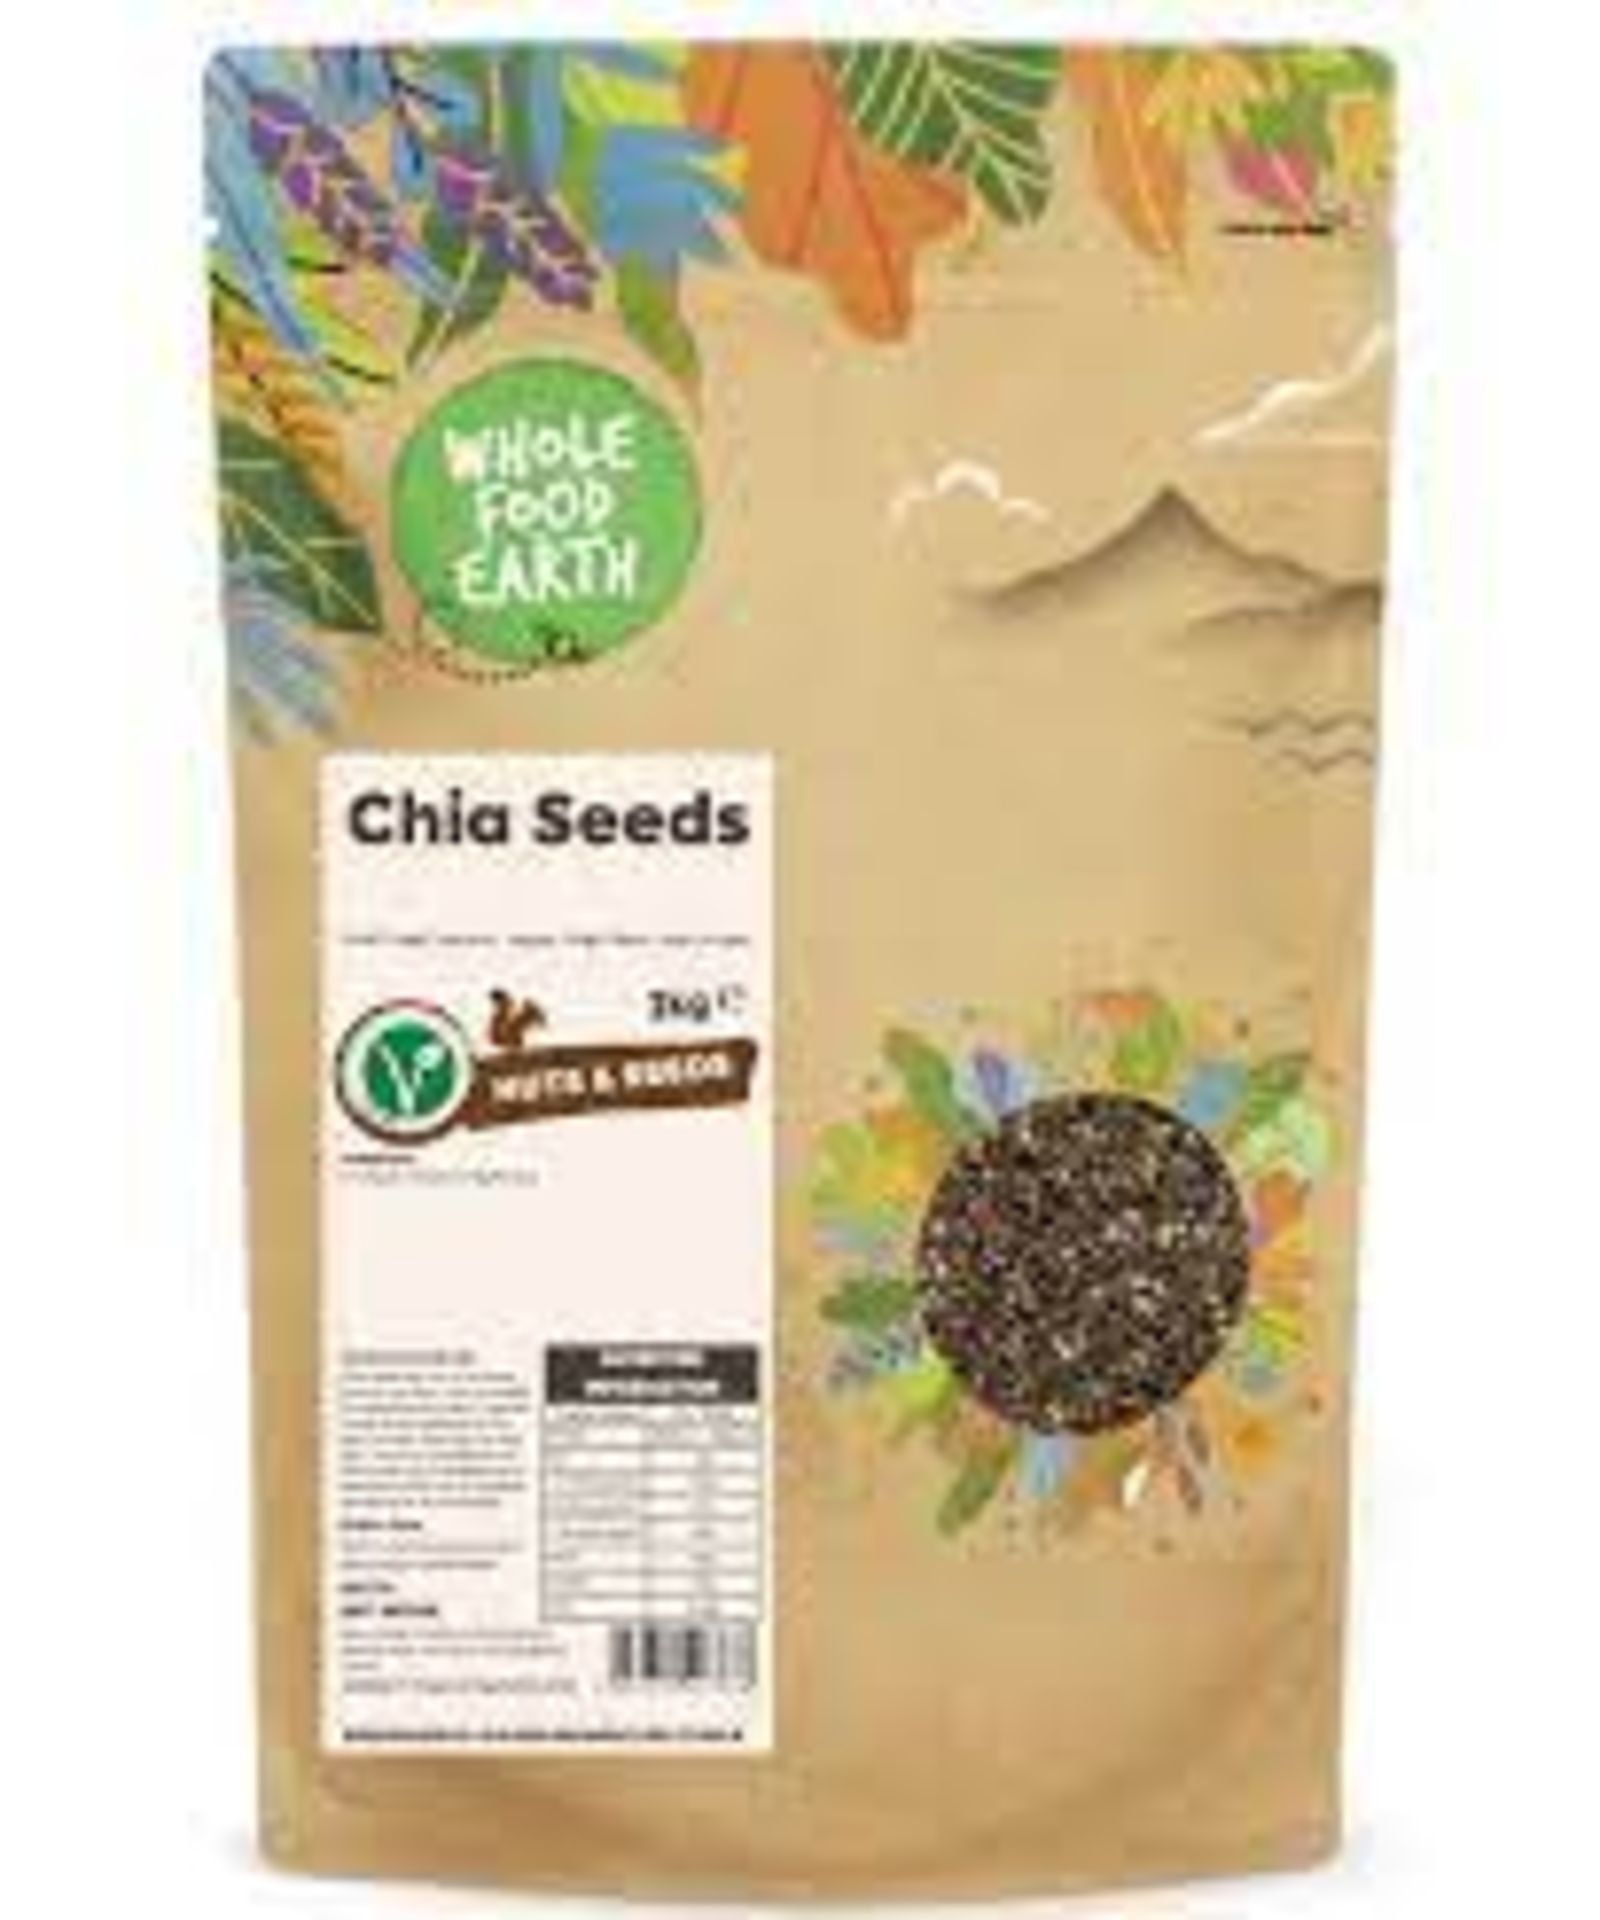 RRP £2307 (Approx. Count 92) spW37c7815t 33 x Wholefood Earth Chia Seeds 2kg | GMO Free |